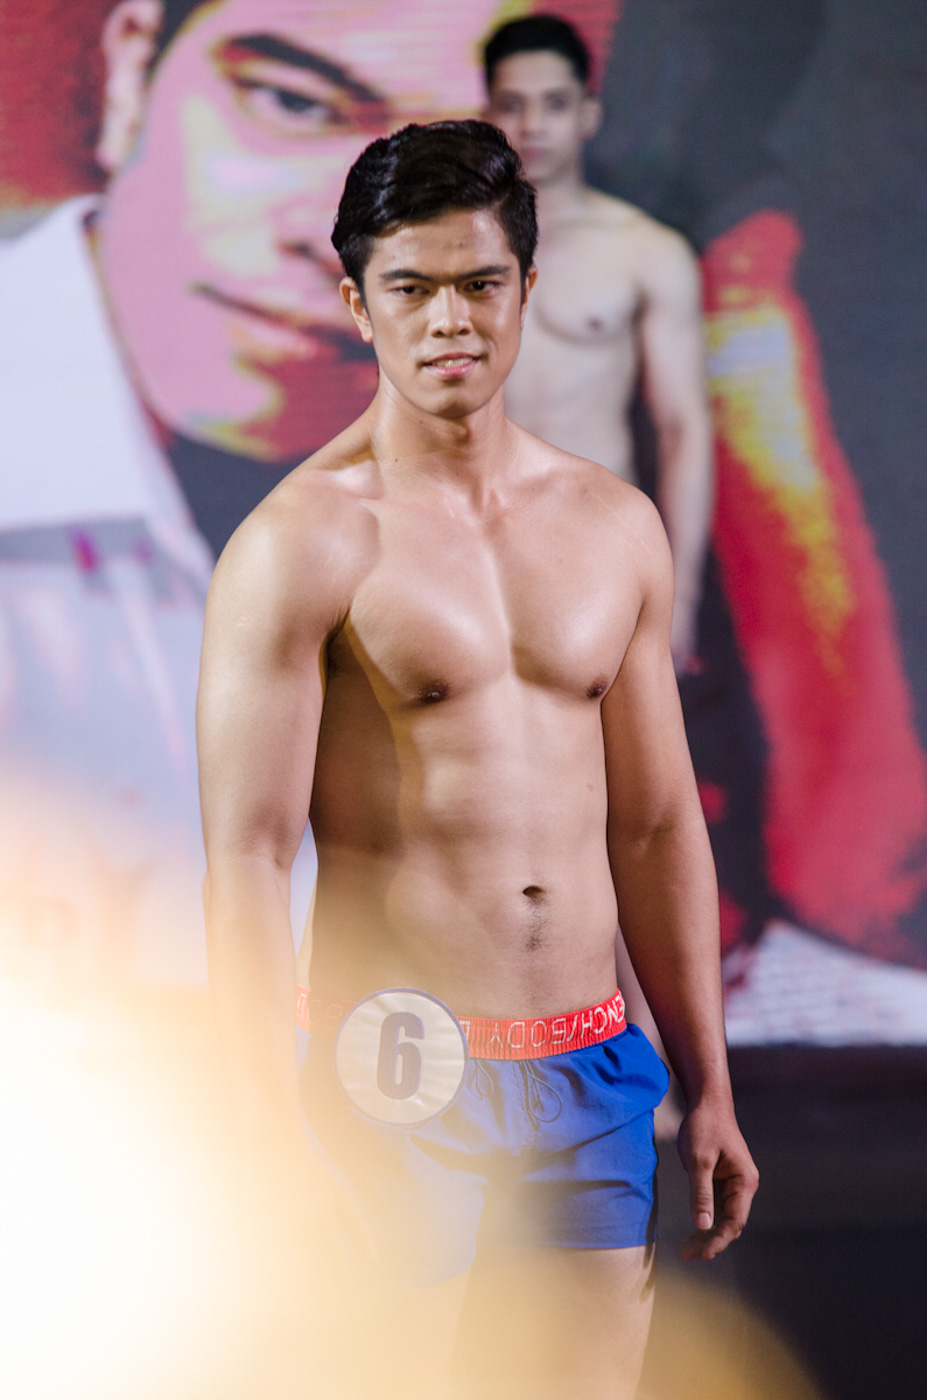 IN PHOTOS: Meet the 16 candidates of Mr World Philippines 2018